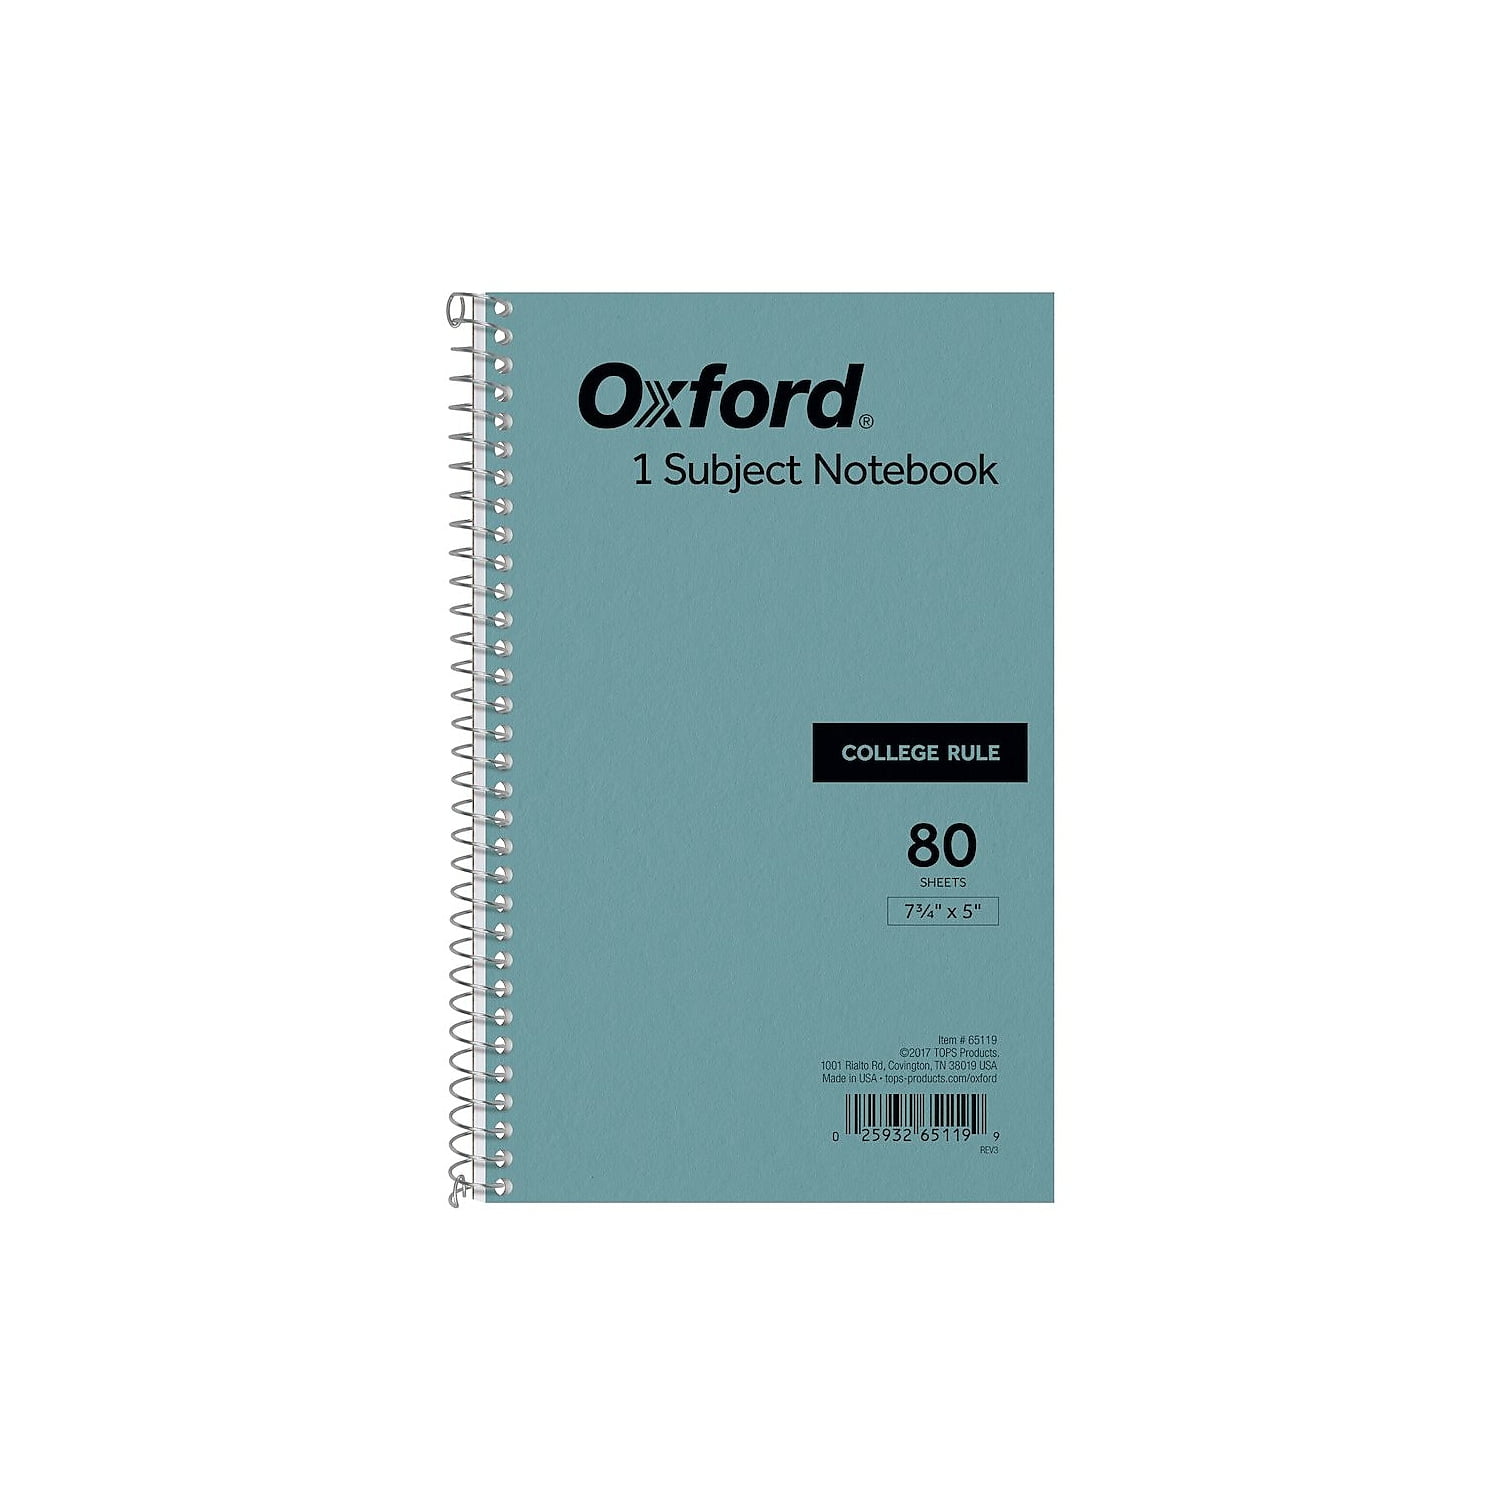 Oxford 1-Subject Pressboard Notebook, 5 x 7-3/4, College Rule, Blue  Cover, 80 Sheets (65119)